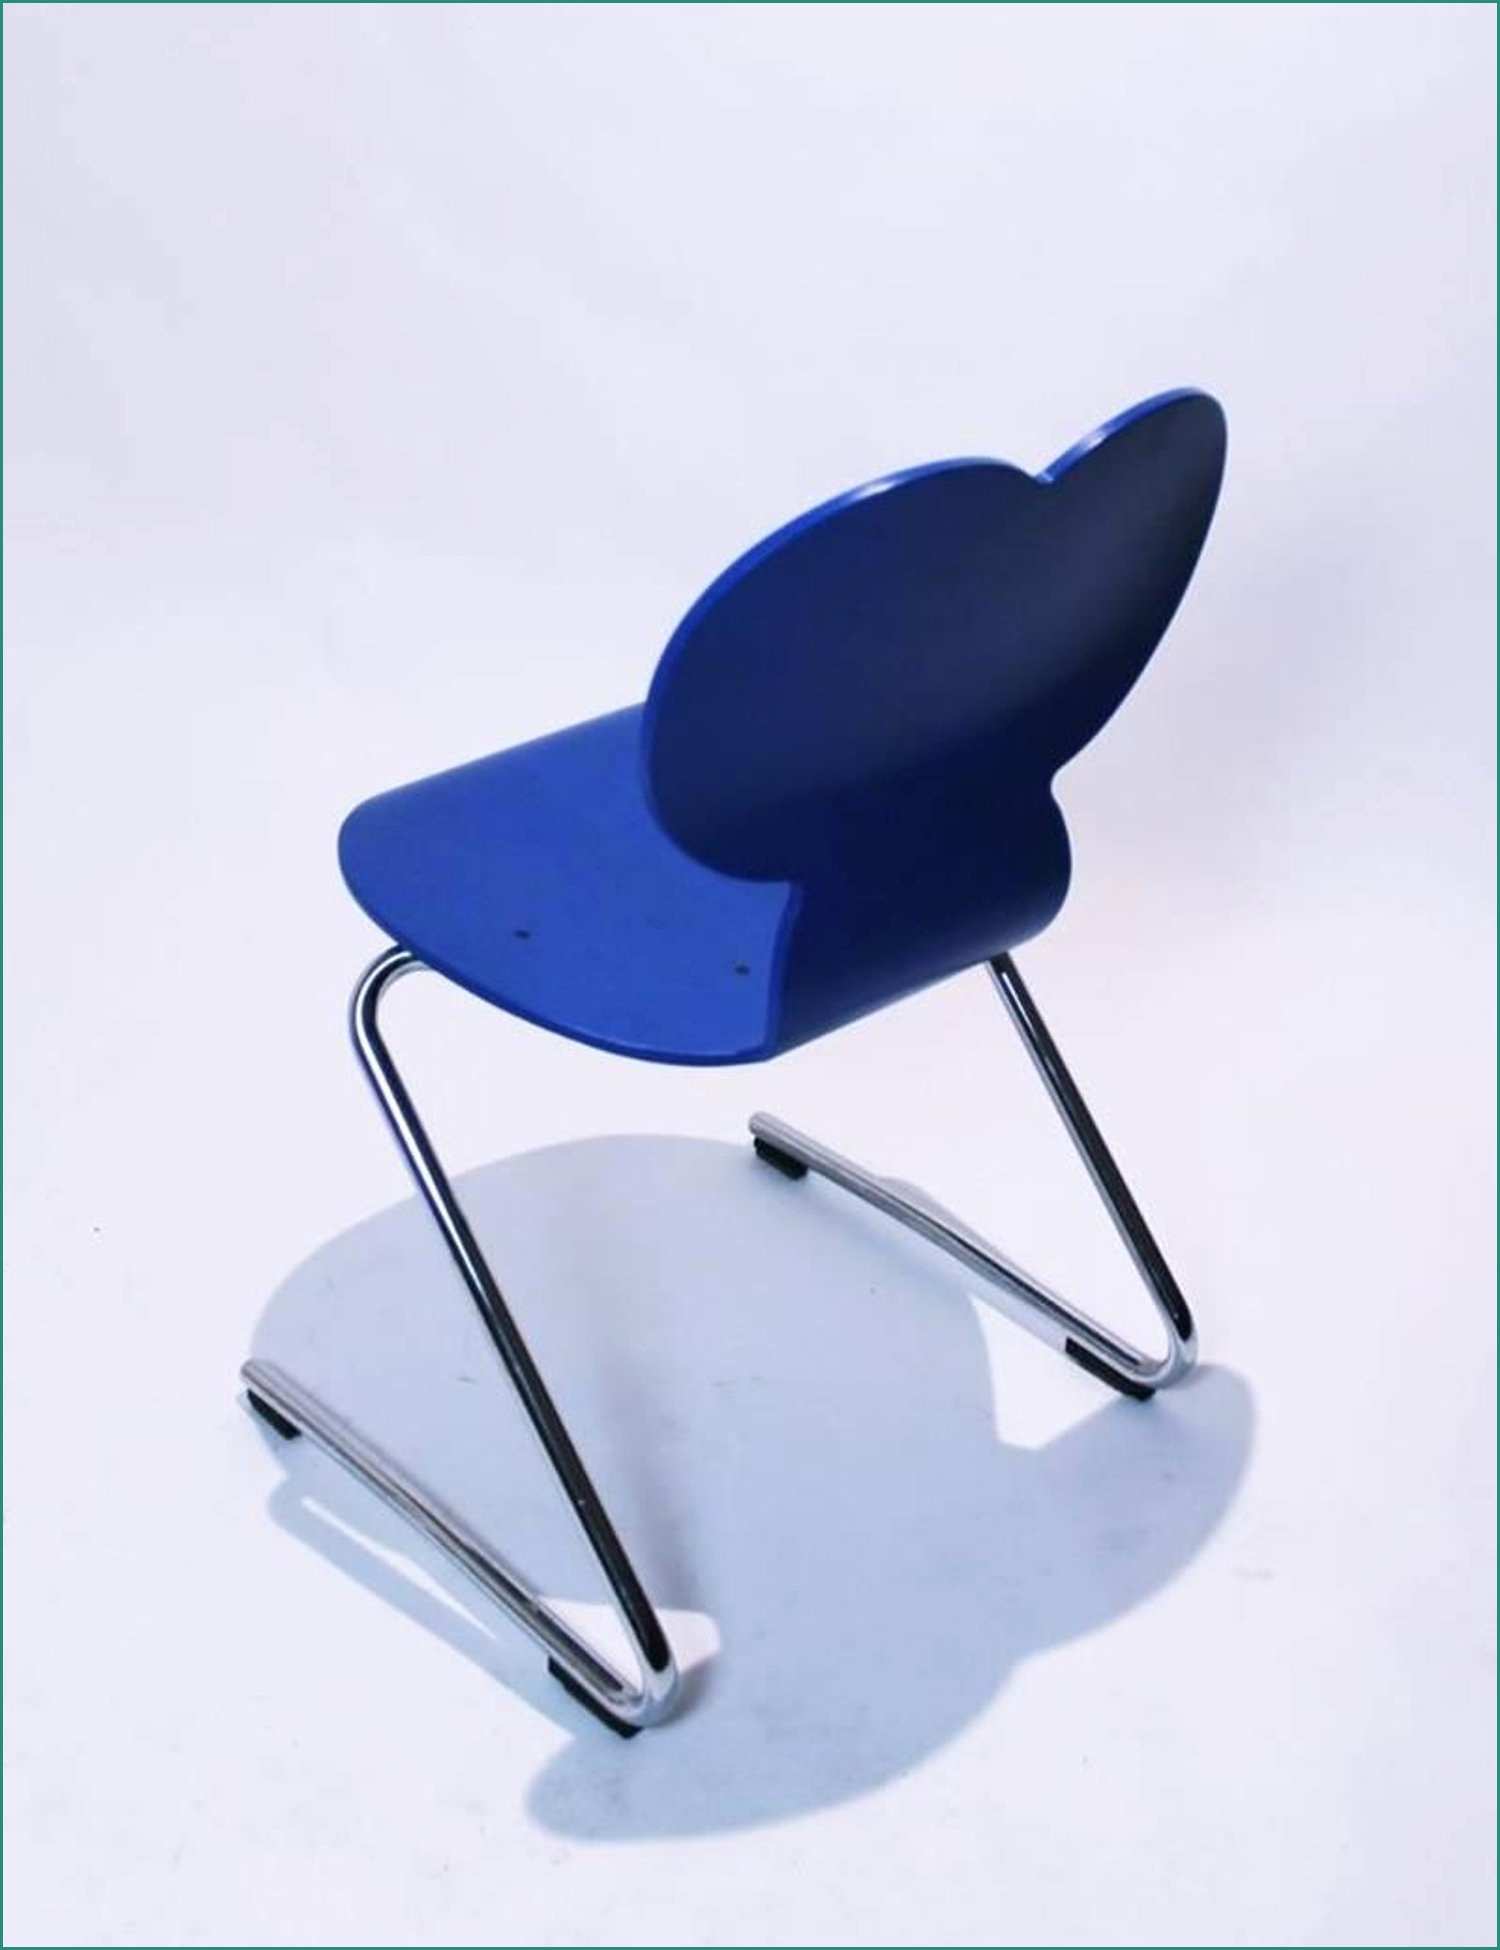 Verner Panton Chair E Pantoflex Mickey Mouse Chair In Blue by Verner Panton for Vs Möbel